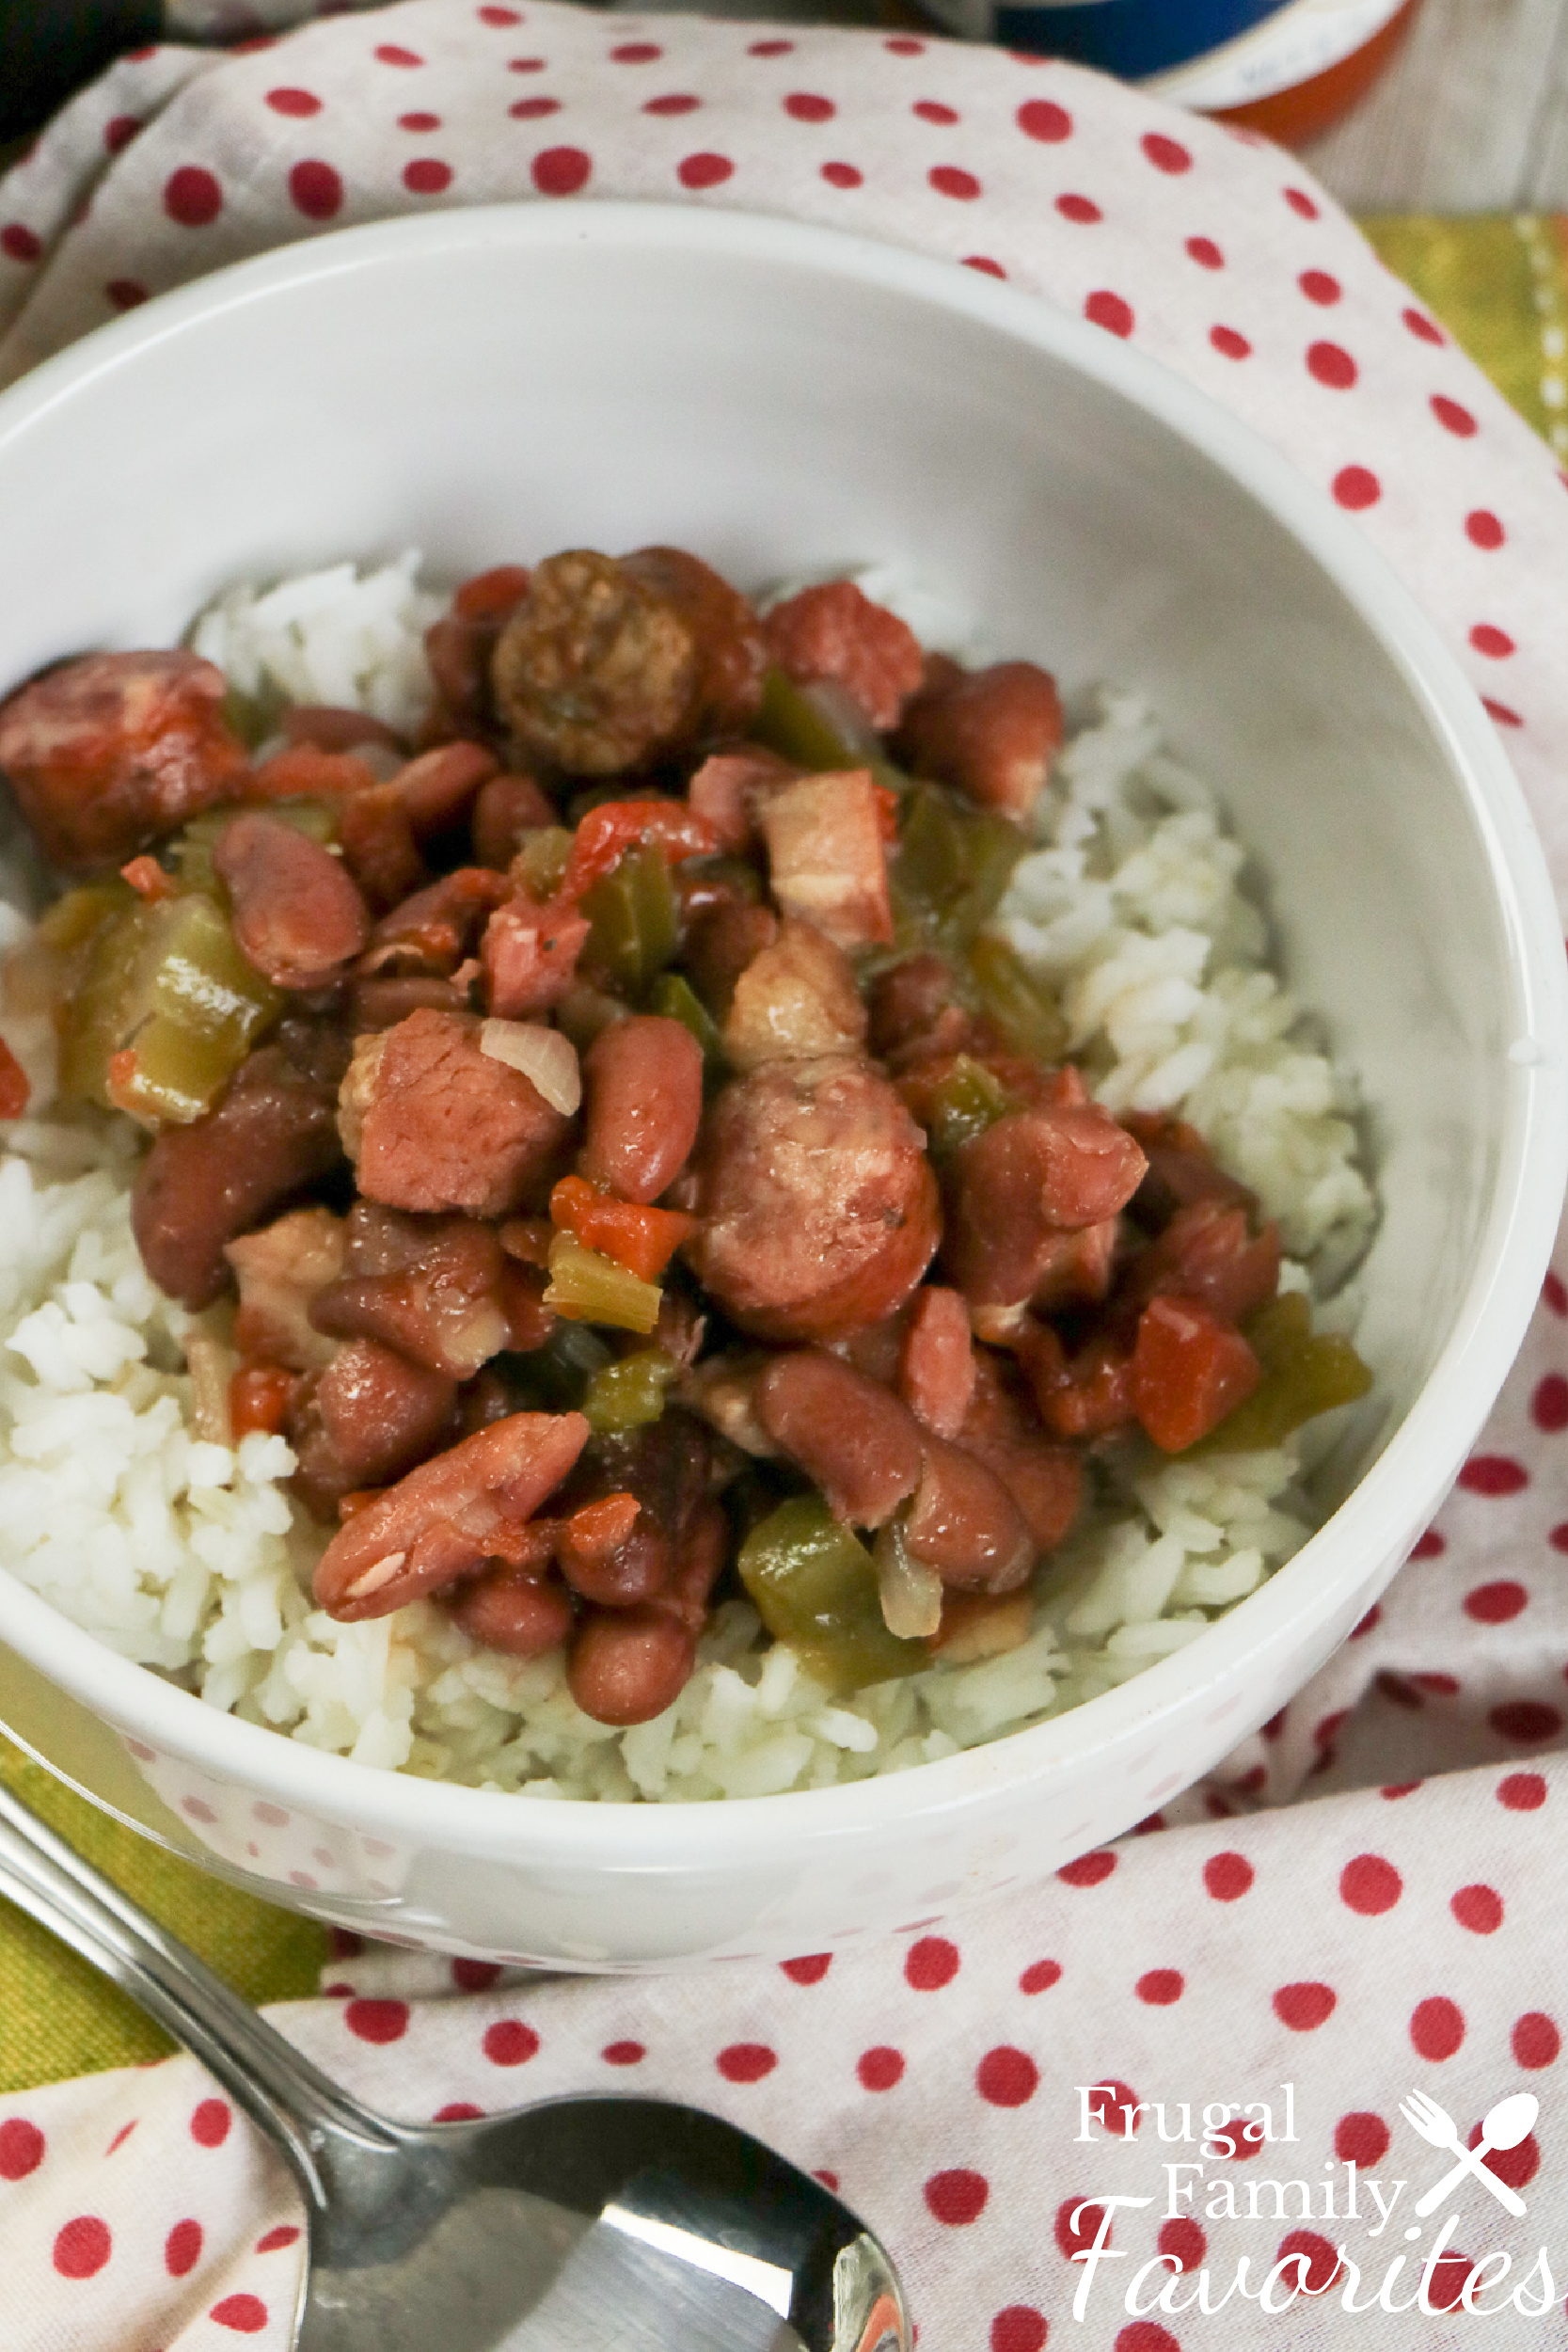 This stovetop Southern Red Beans and Rice recipe includes ham and sausage which makes it incredible.